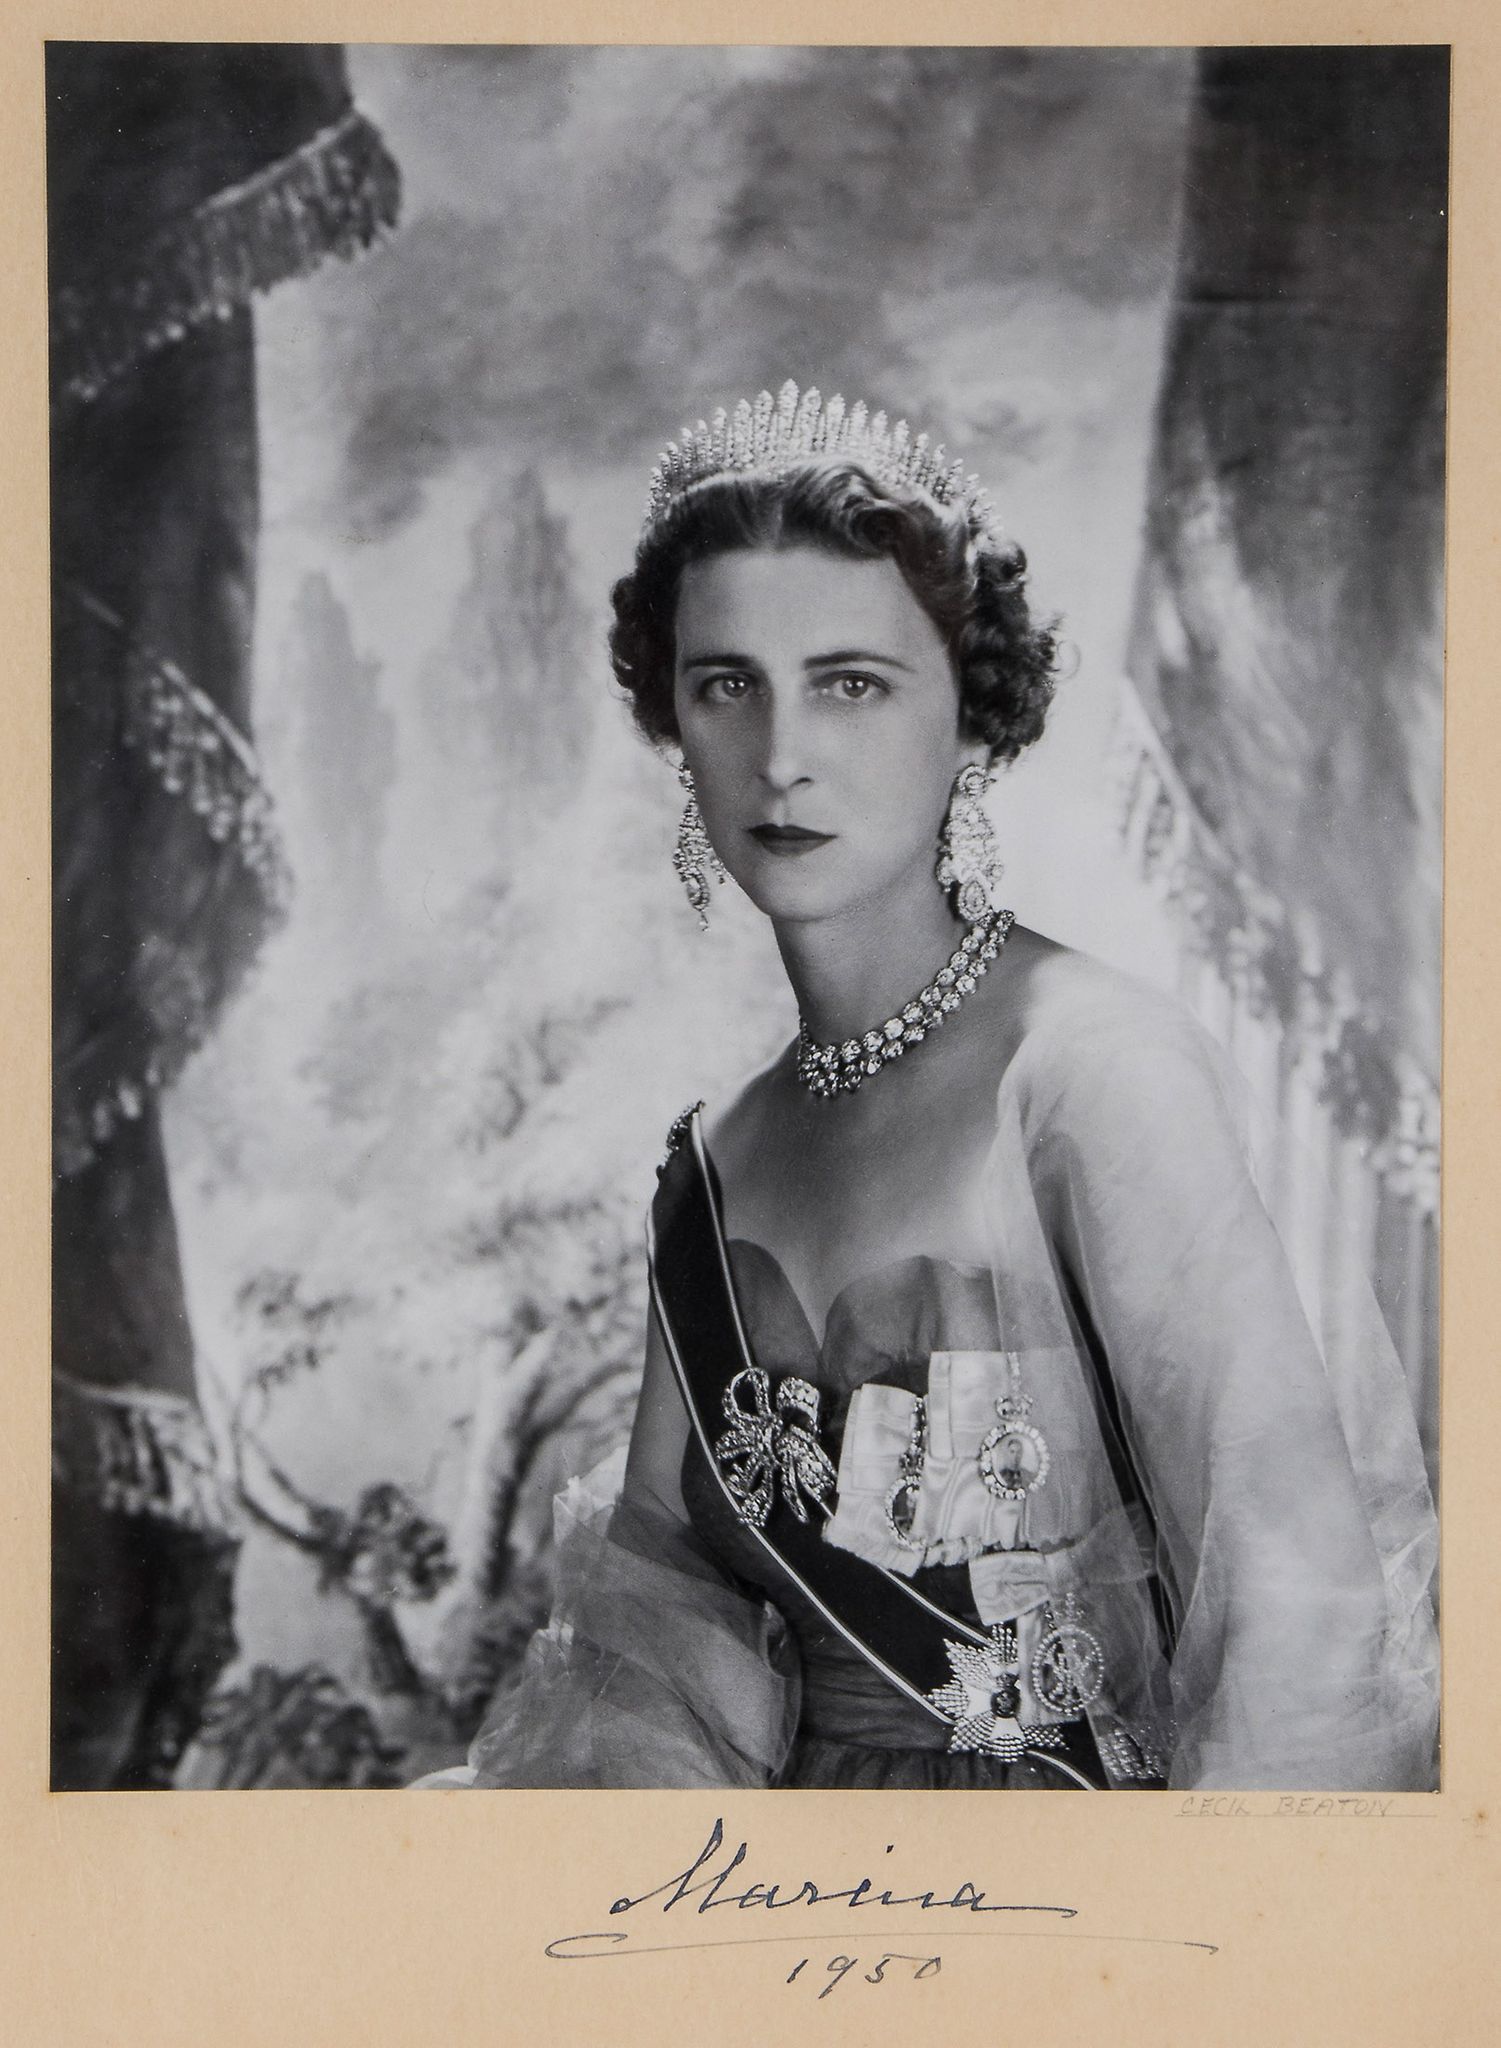 MARINA OF KENT - CECIL BEATON - Mounted 25 x 20cm black and white, head and shoulders